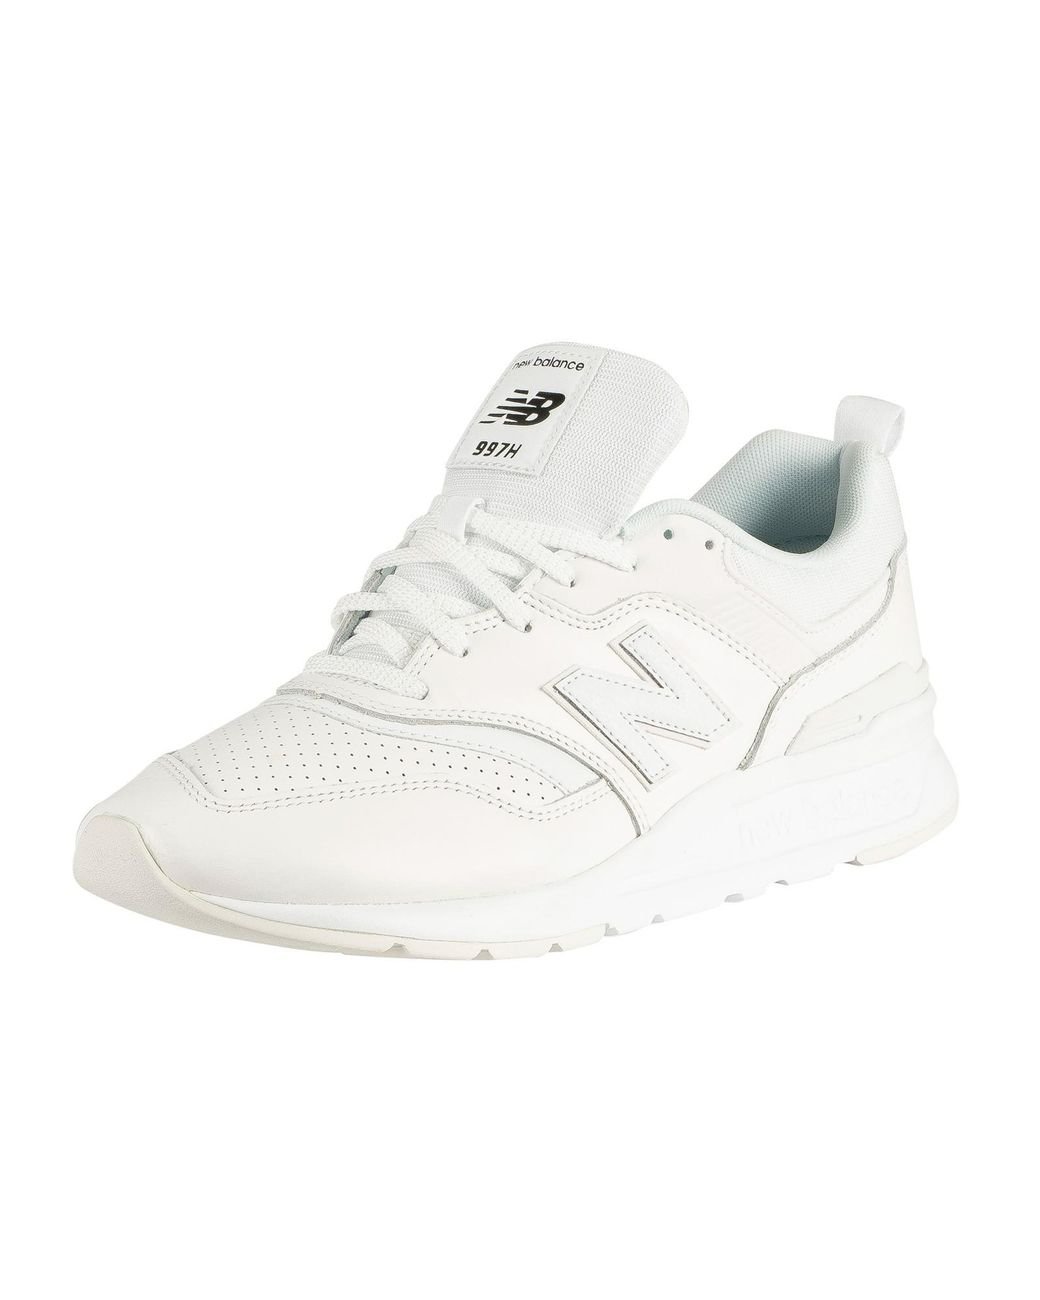 New 997h Leather Trainers in White | Lyst